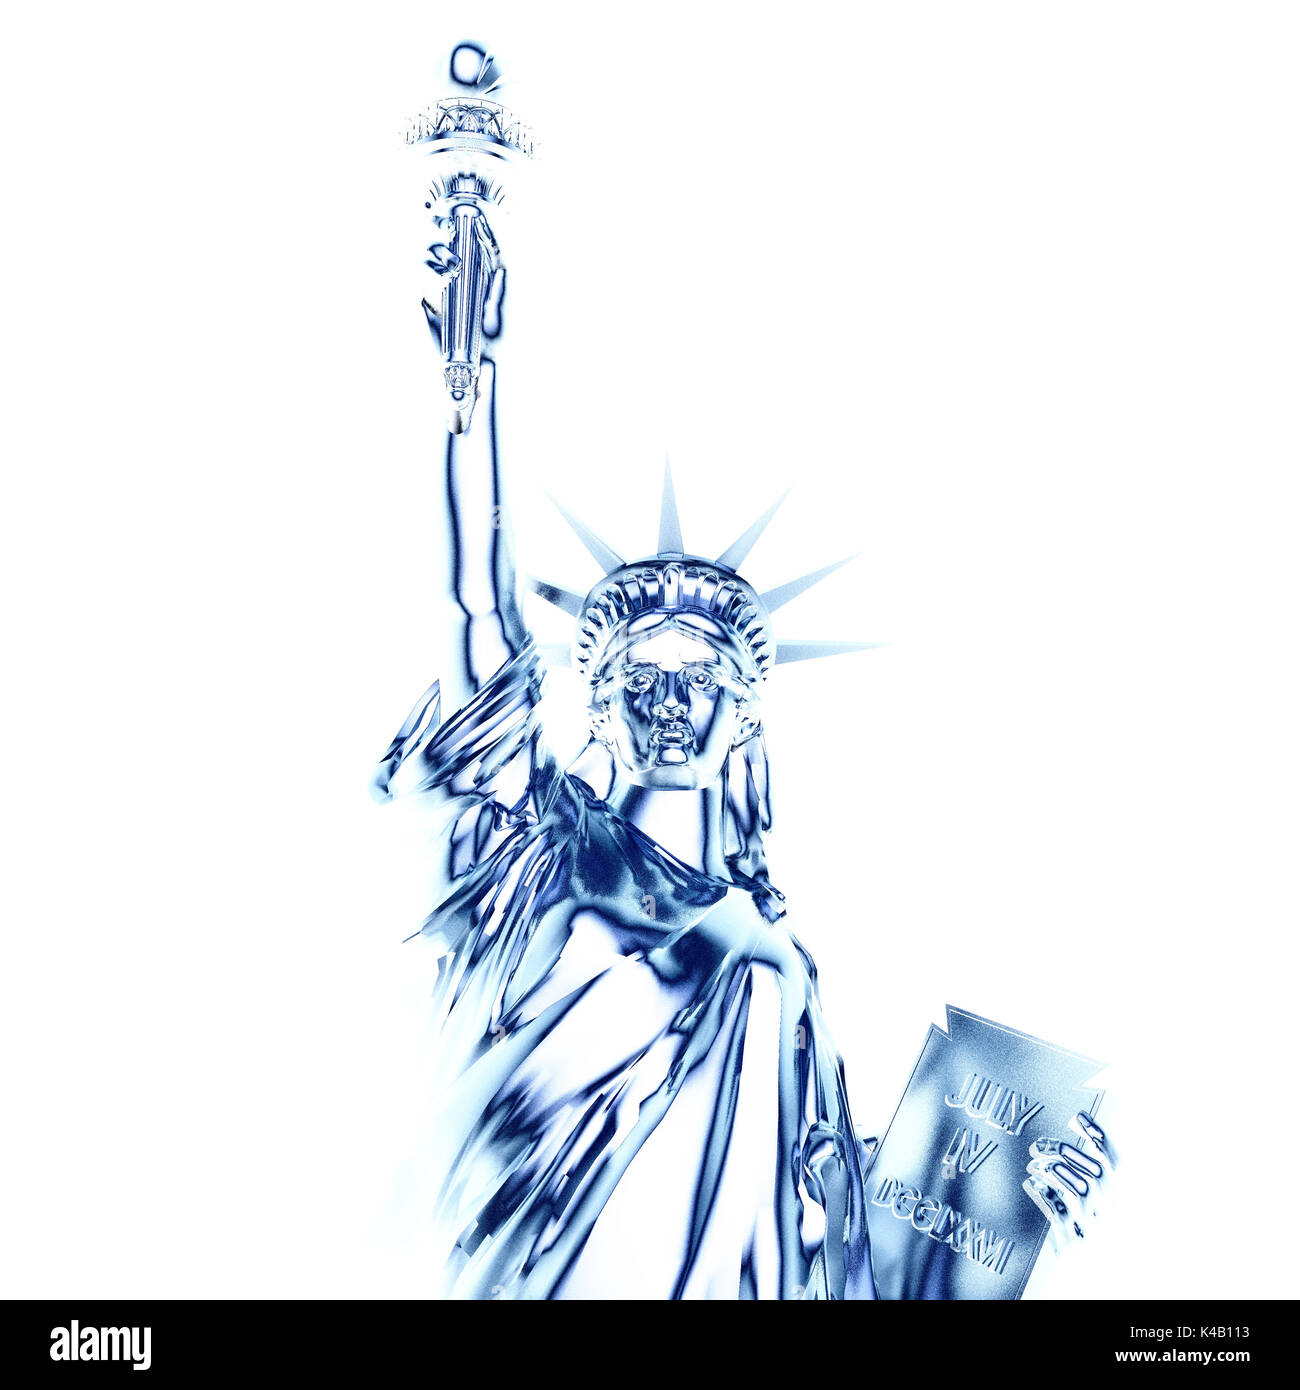 Digital Rendering Of The Statue Of Liberty Stock Photo